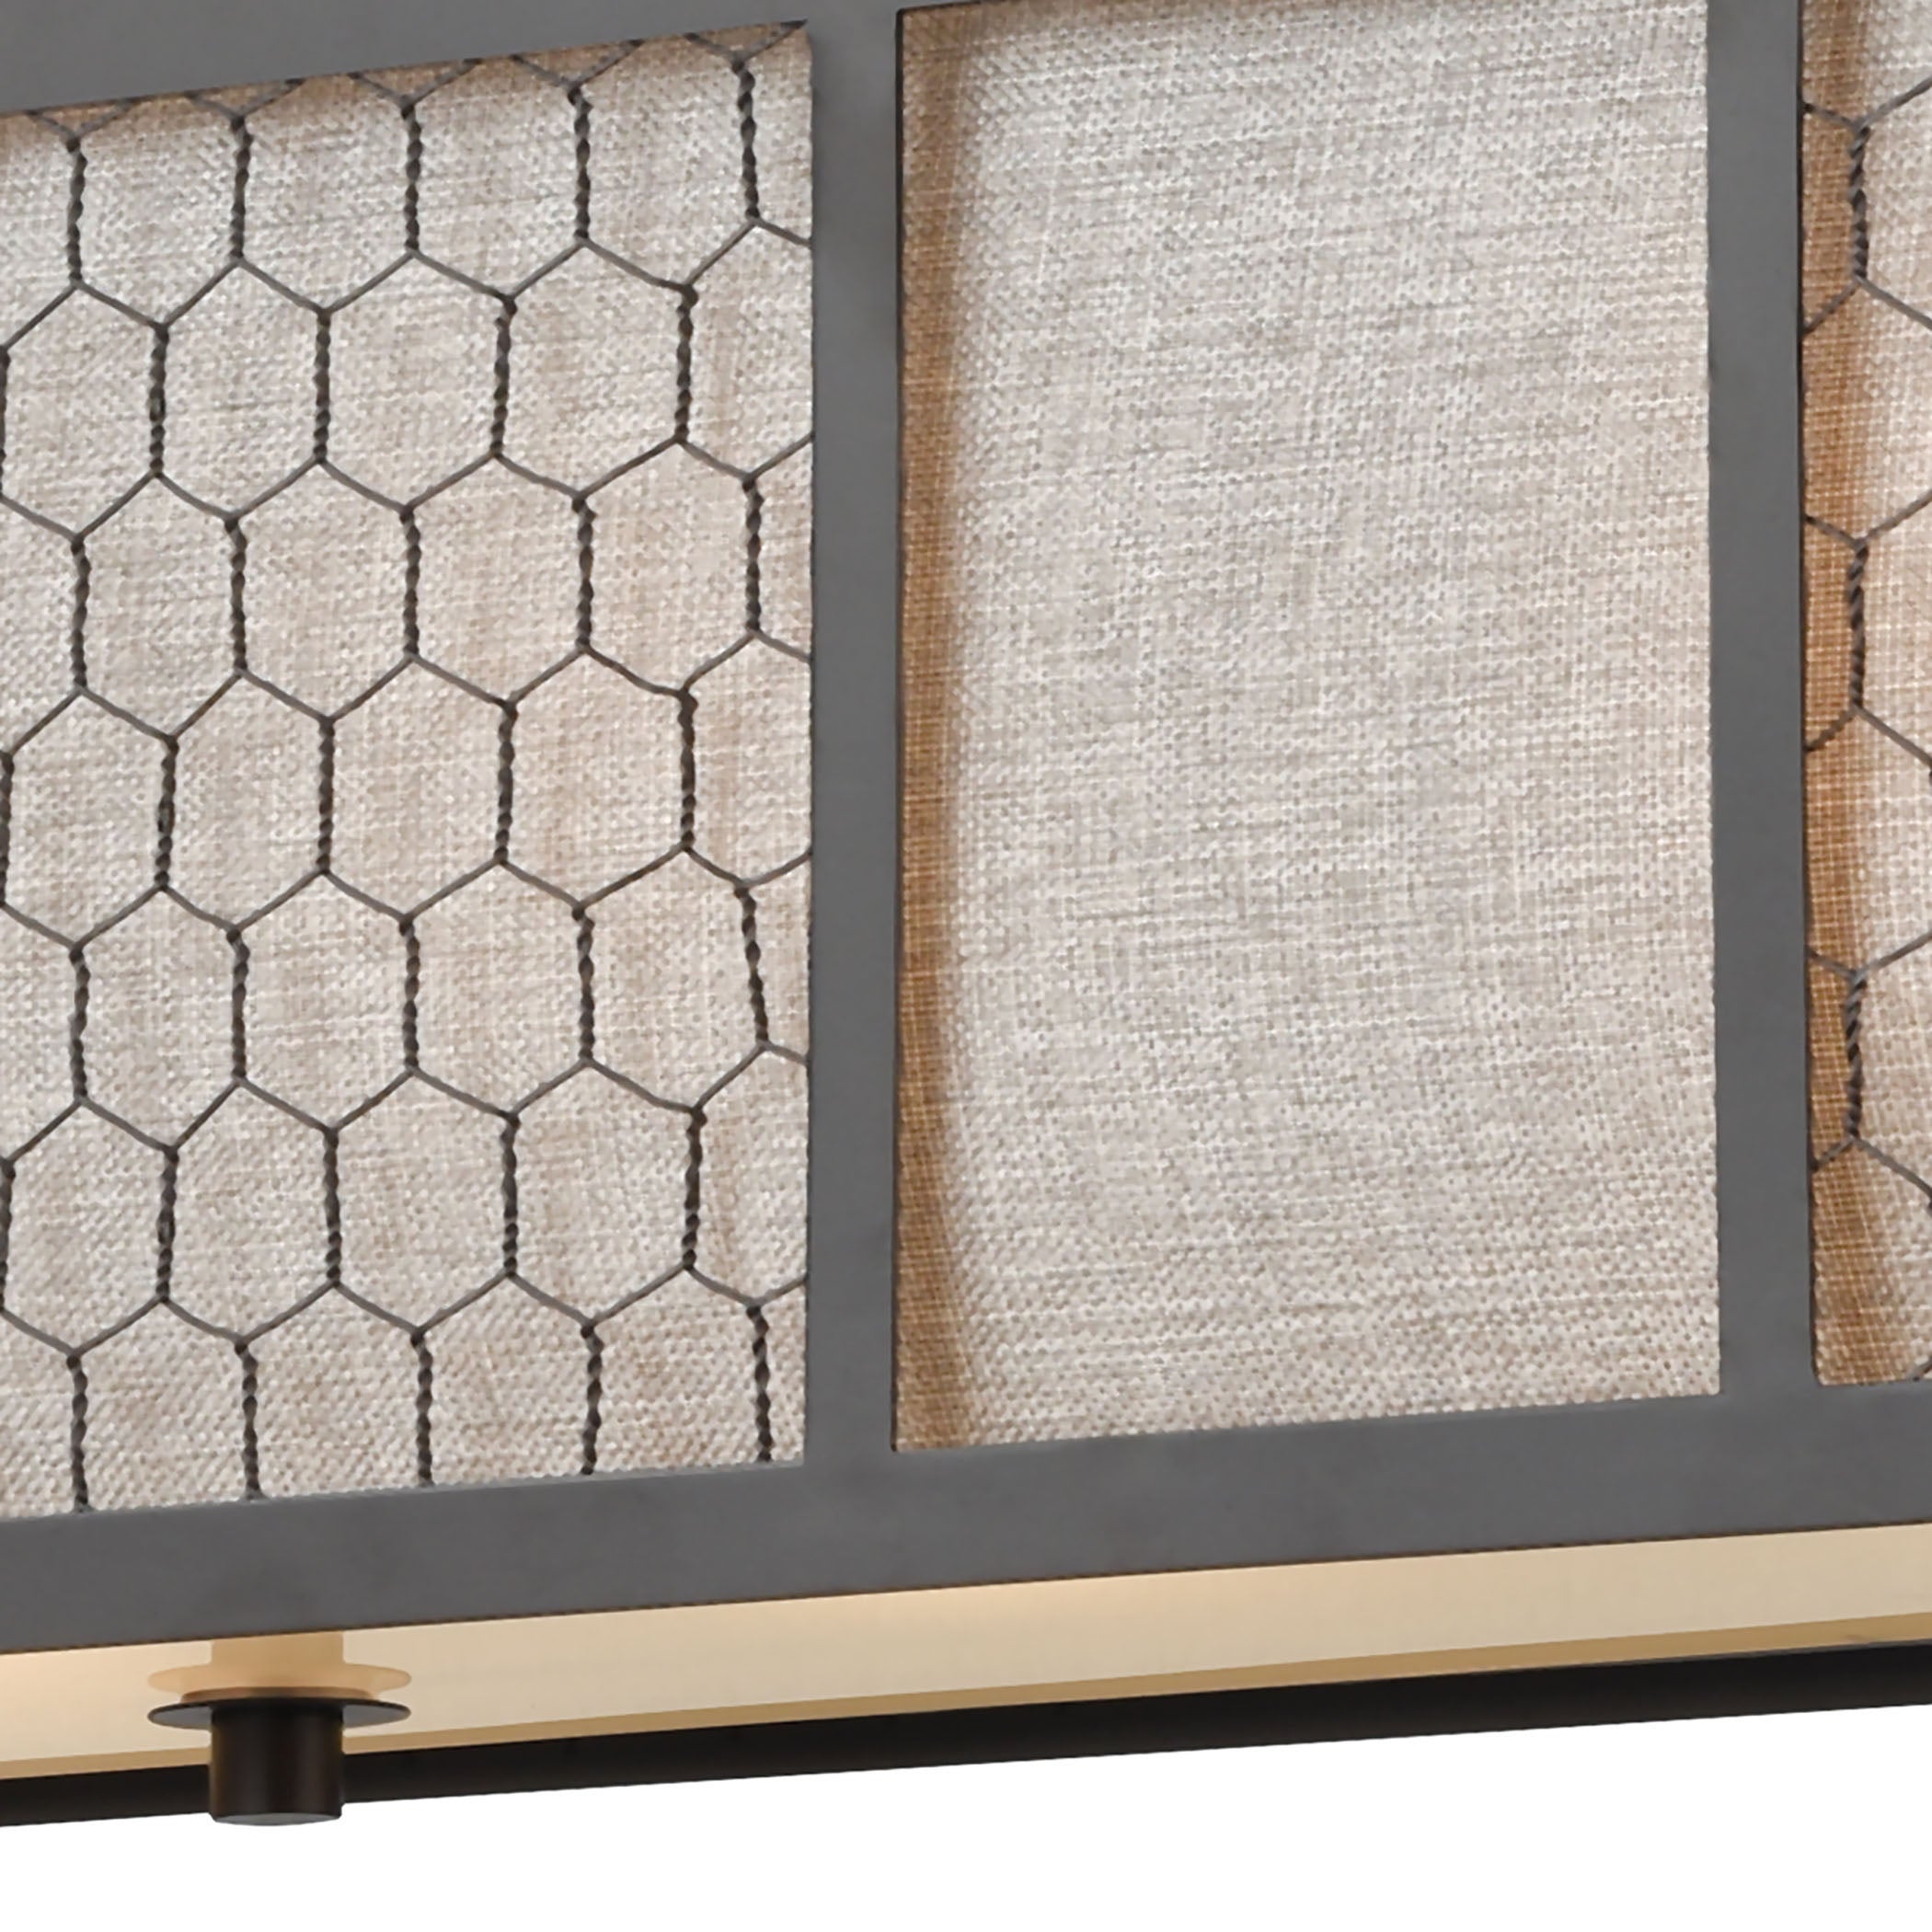 ELK Lighting 15244/4 Filmore 4-Light Linear Chandelier in Oil Rubbed Bronze with Wire Mesh and Gray Linen Shade